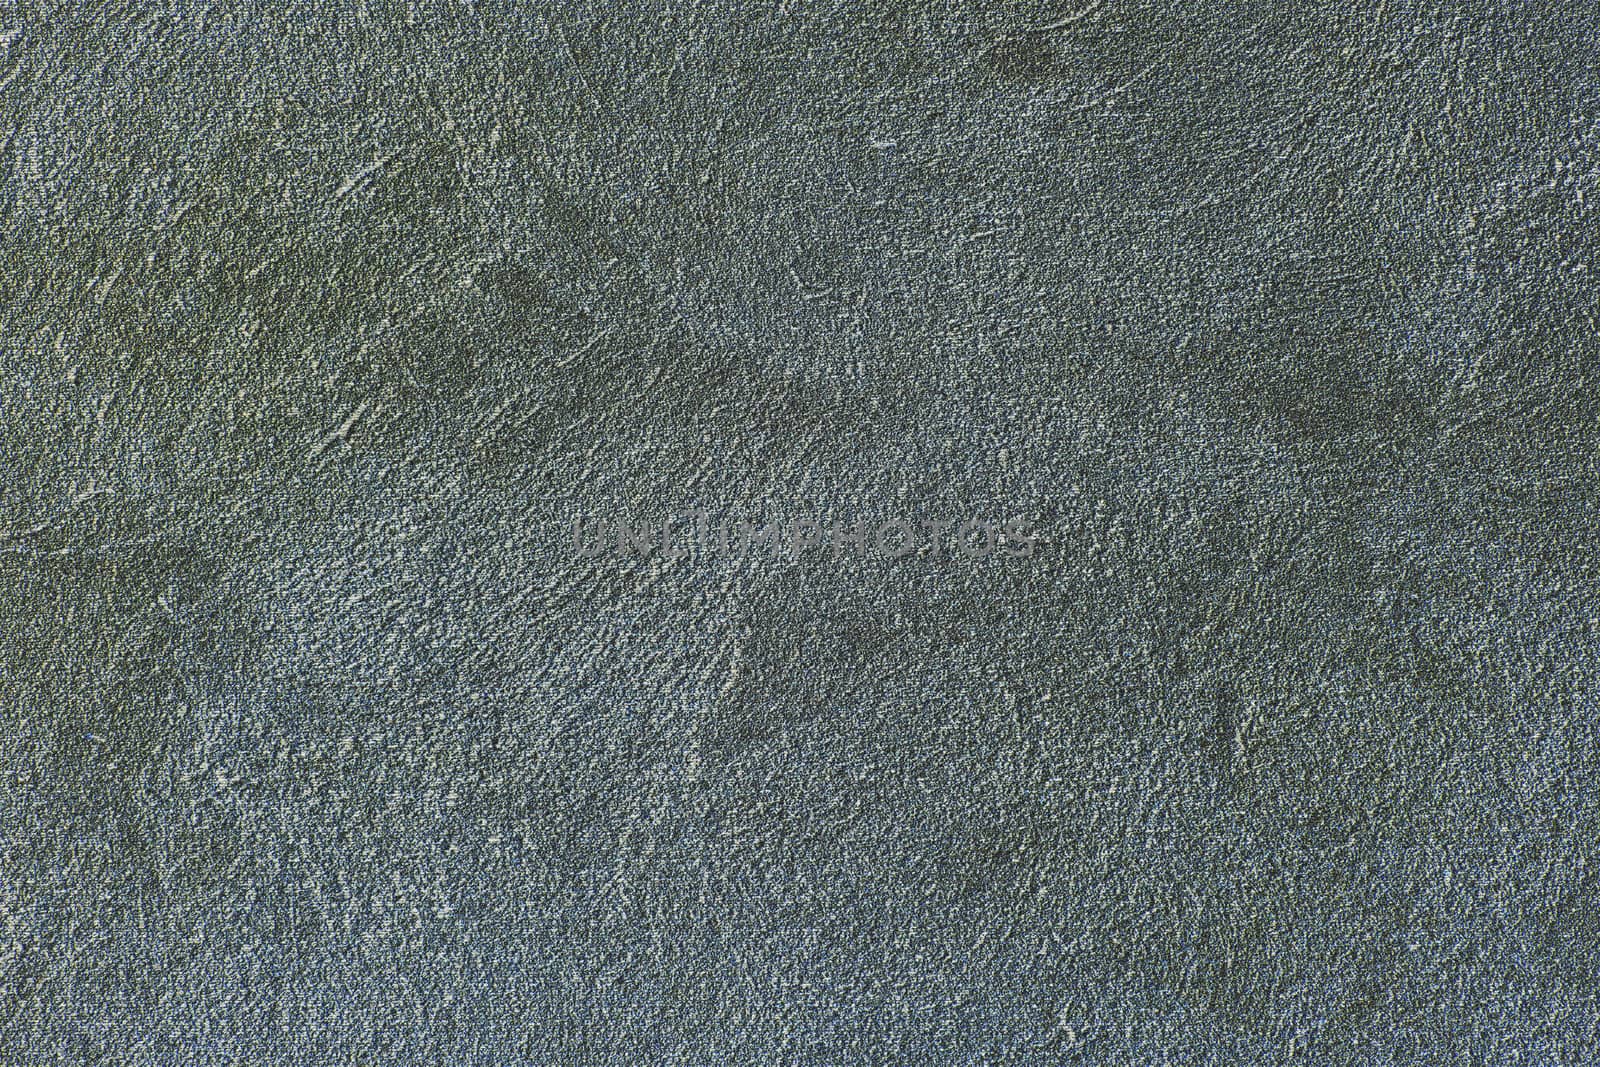 Concrete Wall Texture Background. Suitable for Backdrop, Wallpaper, and Decorative Design by Tartezy